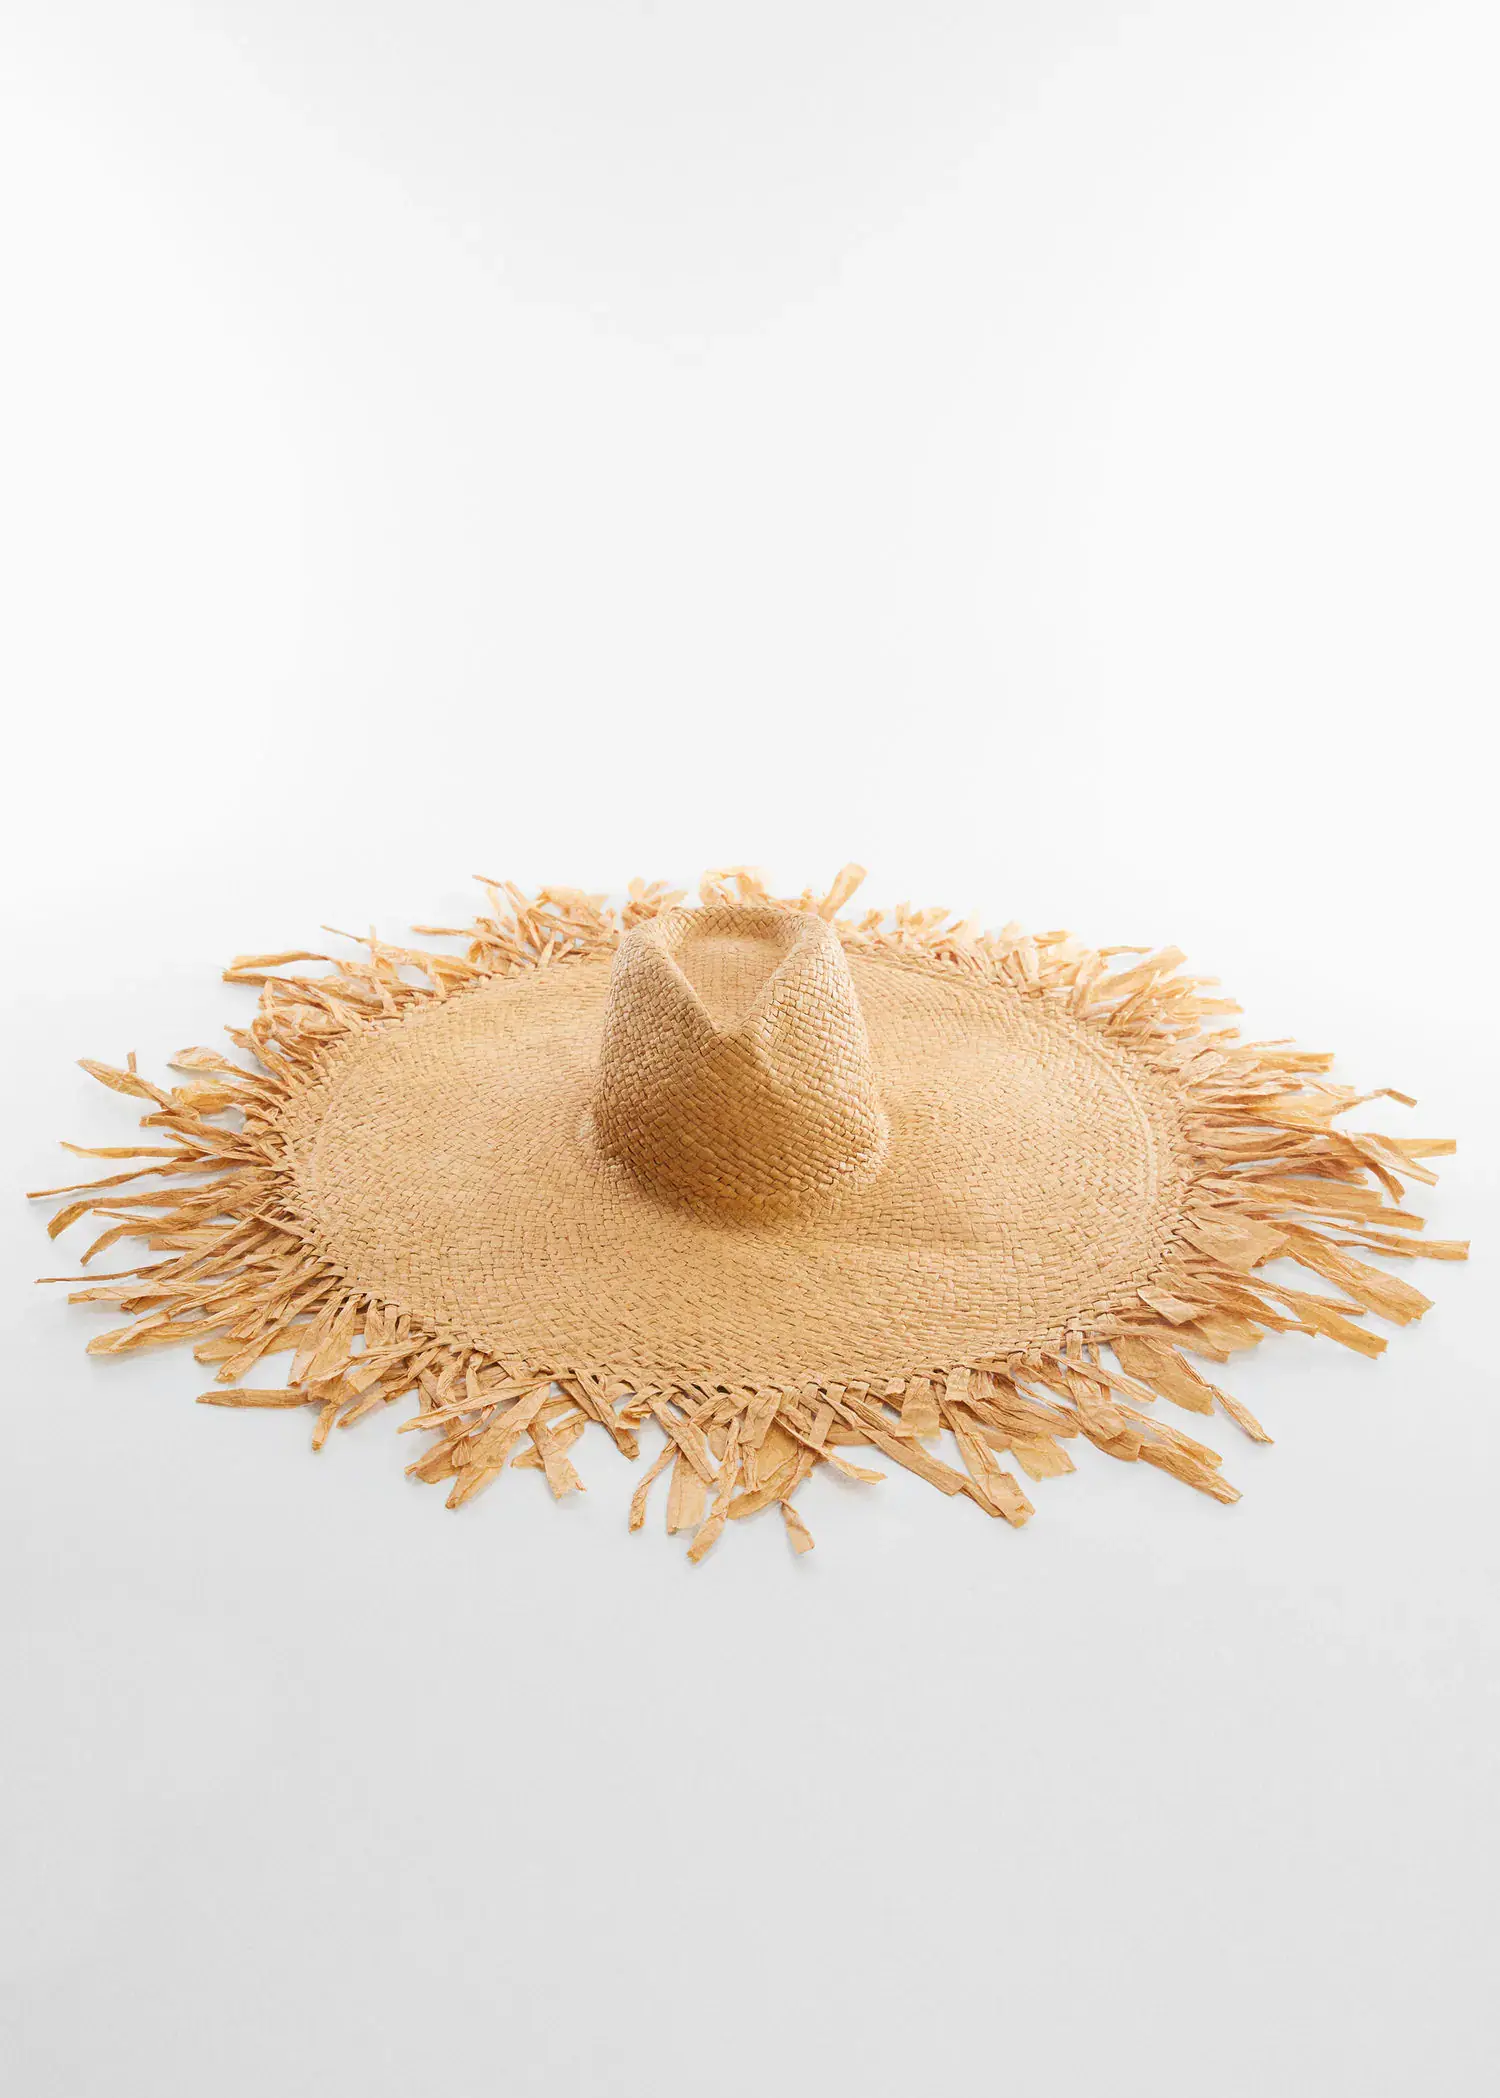 Mango Natural fiber maxi hat. a straw hat sitting on top of a white table. 